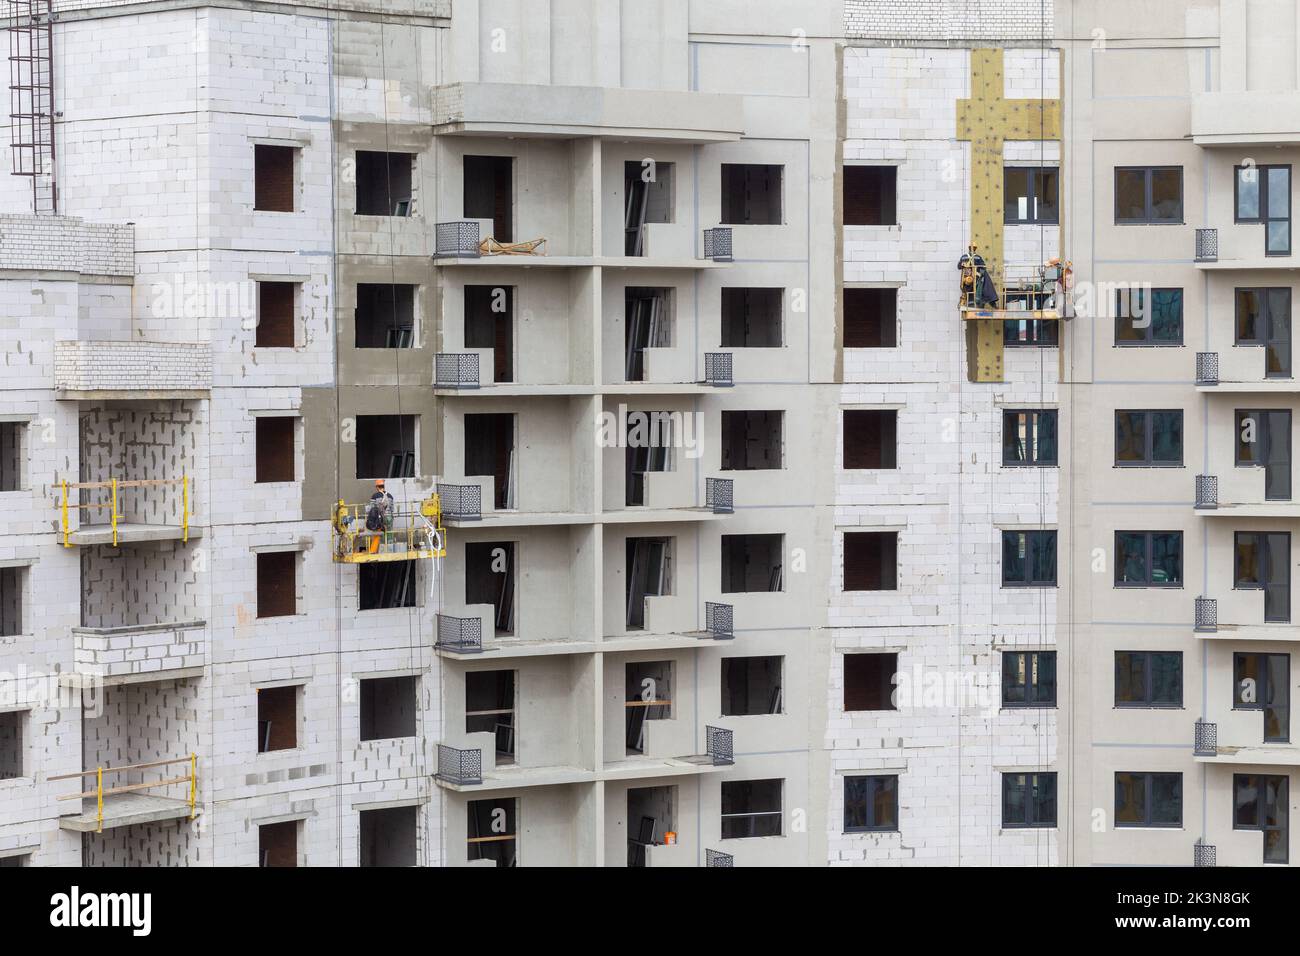 The process of insulating external walls in a multi-storey building ...